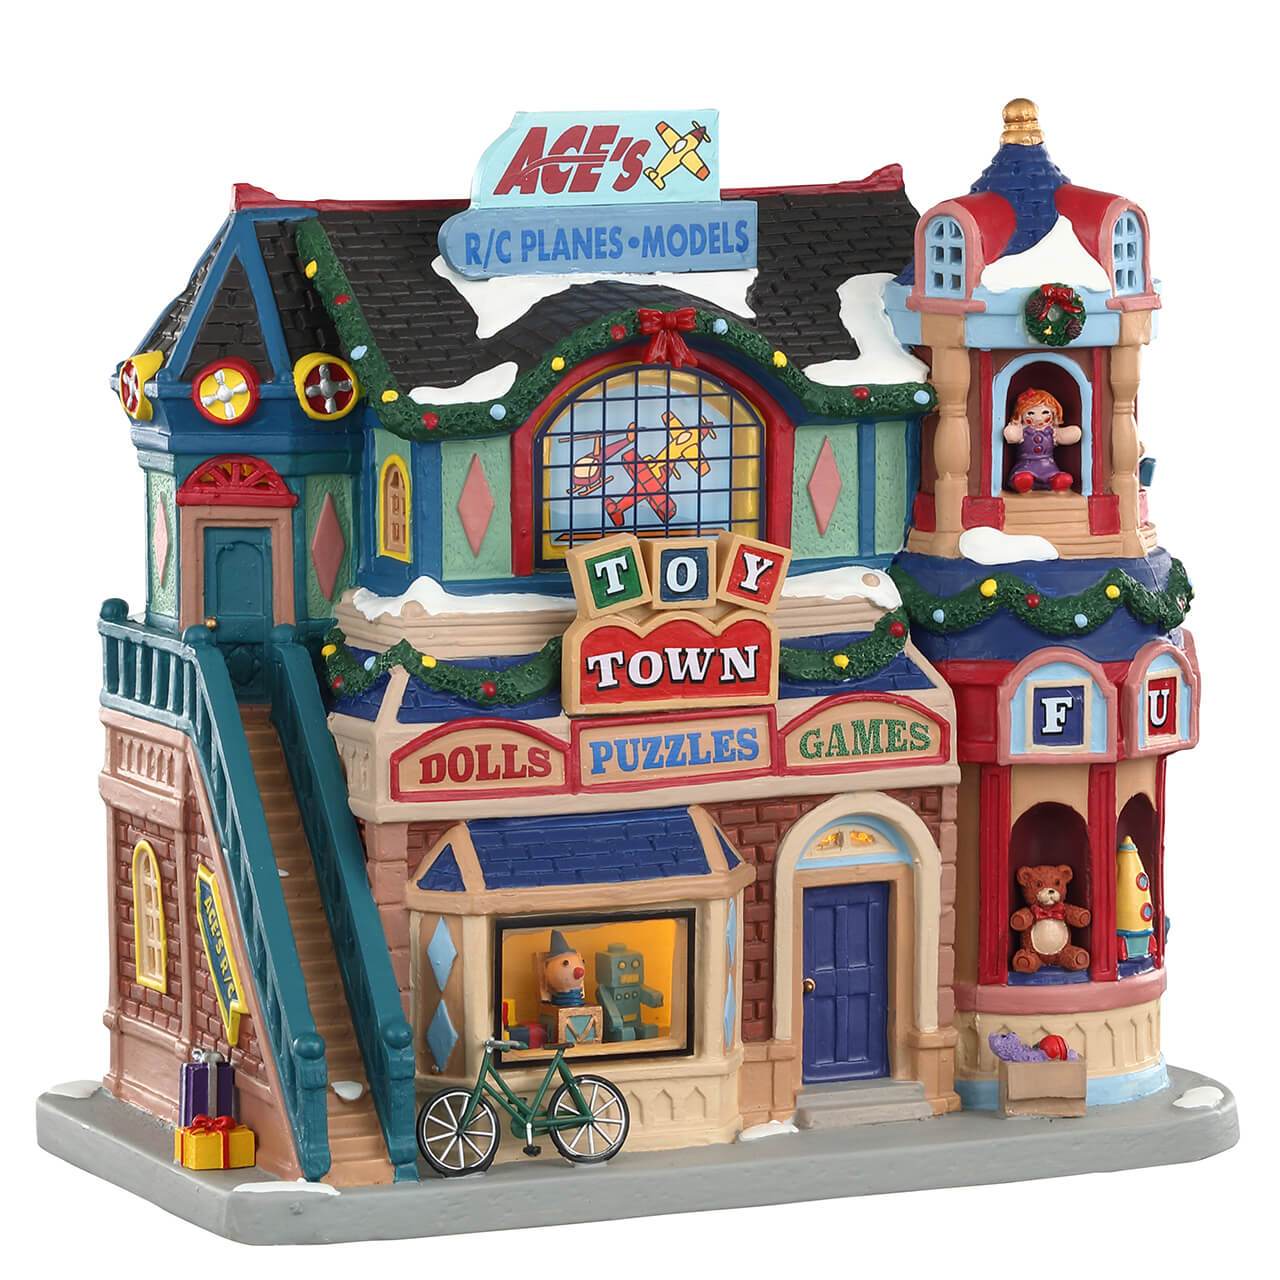 Lemax Lighted Buildings Lemax Toy Town, B/O LED